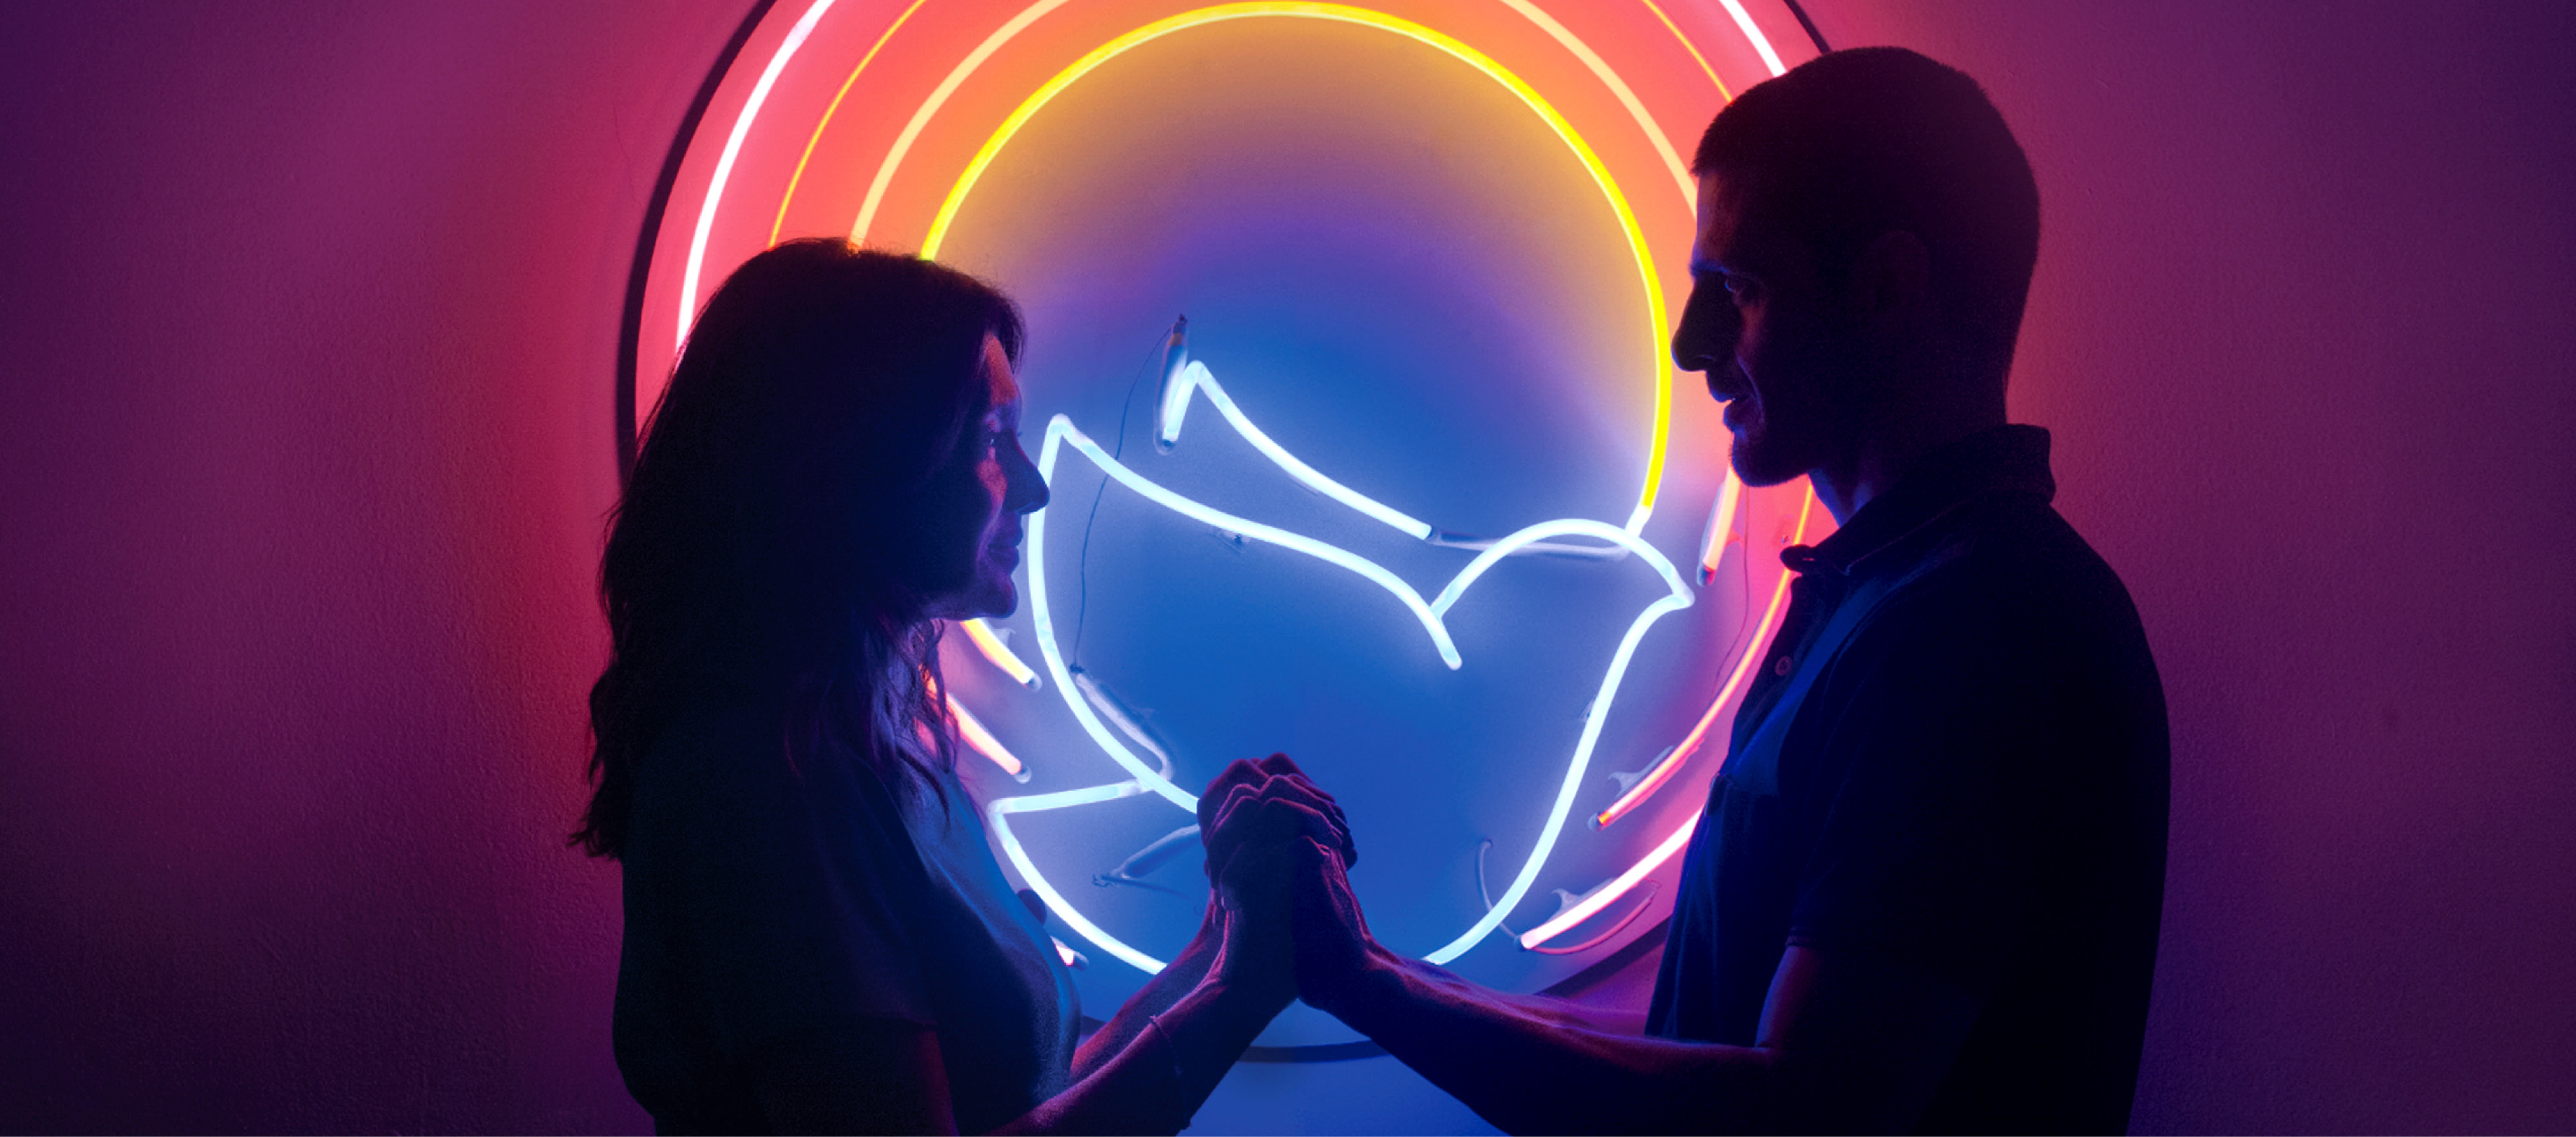 Two humans standing in front of a neon sign with a bird in the center